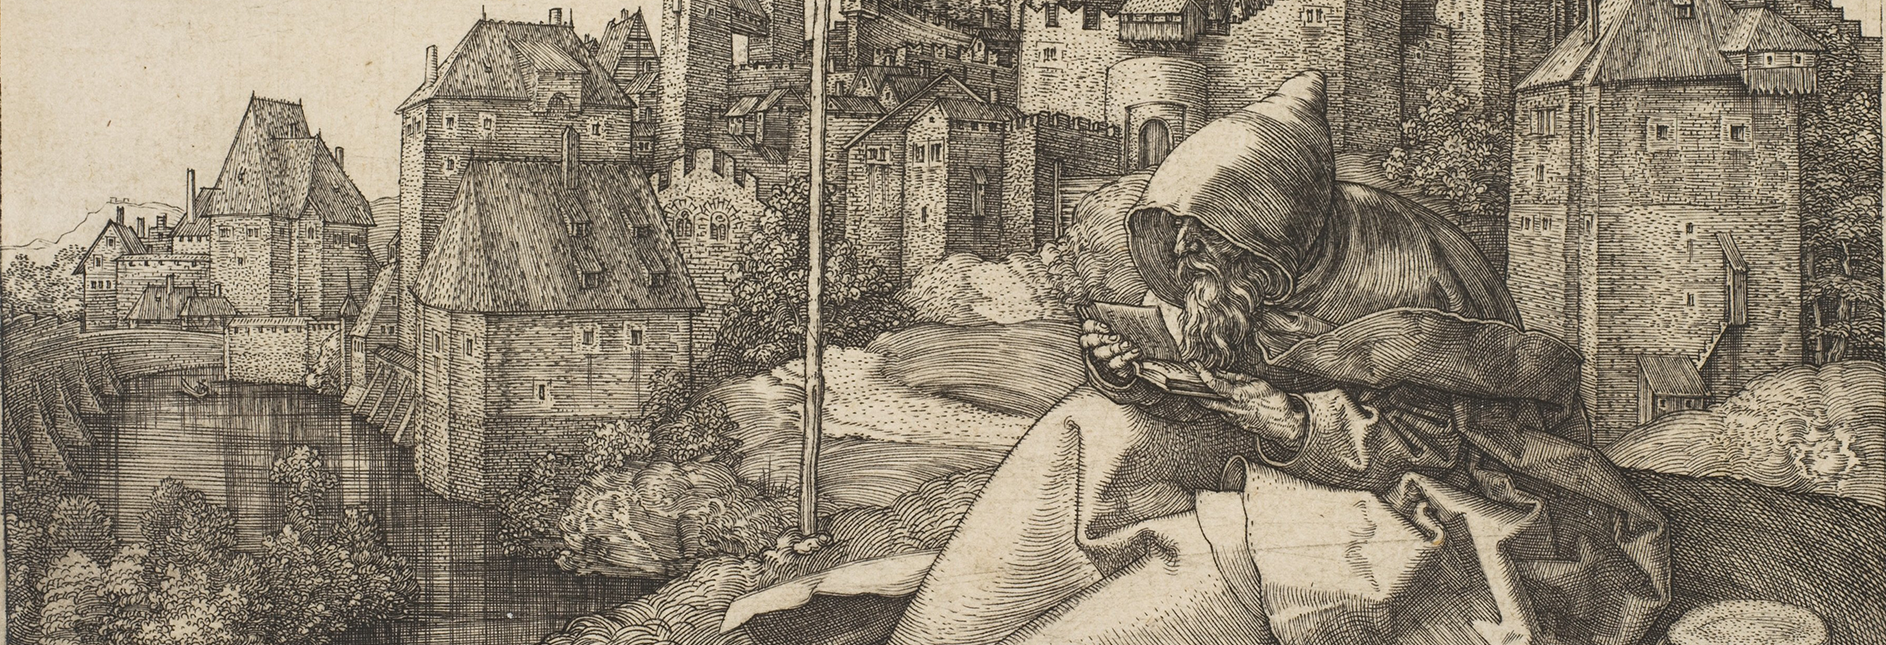 Detail from Albrecht Durer St. Anthony, 1519; engraving on paper, Miami University purchase, 1981.72